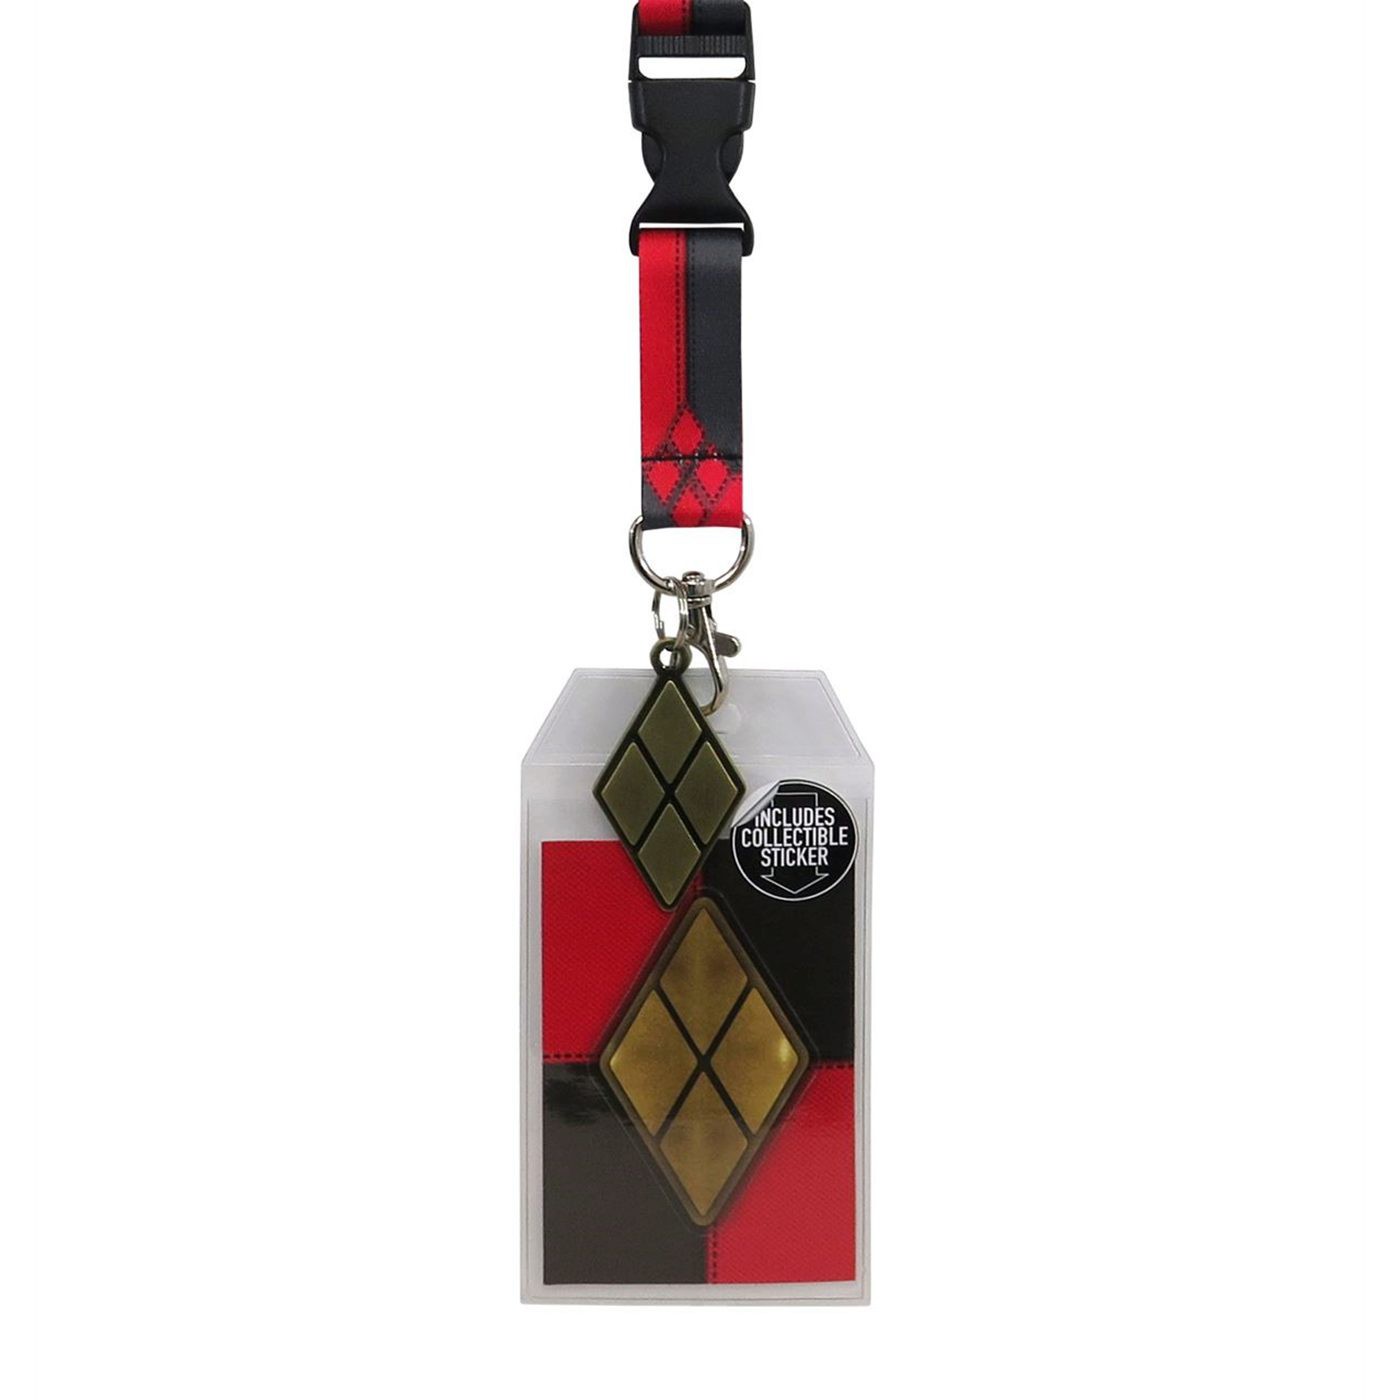 Harley Quinn Suit Up Lanyard with Metal Charm